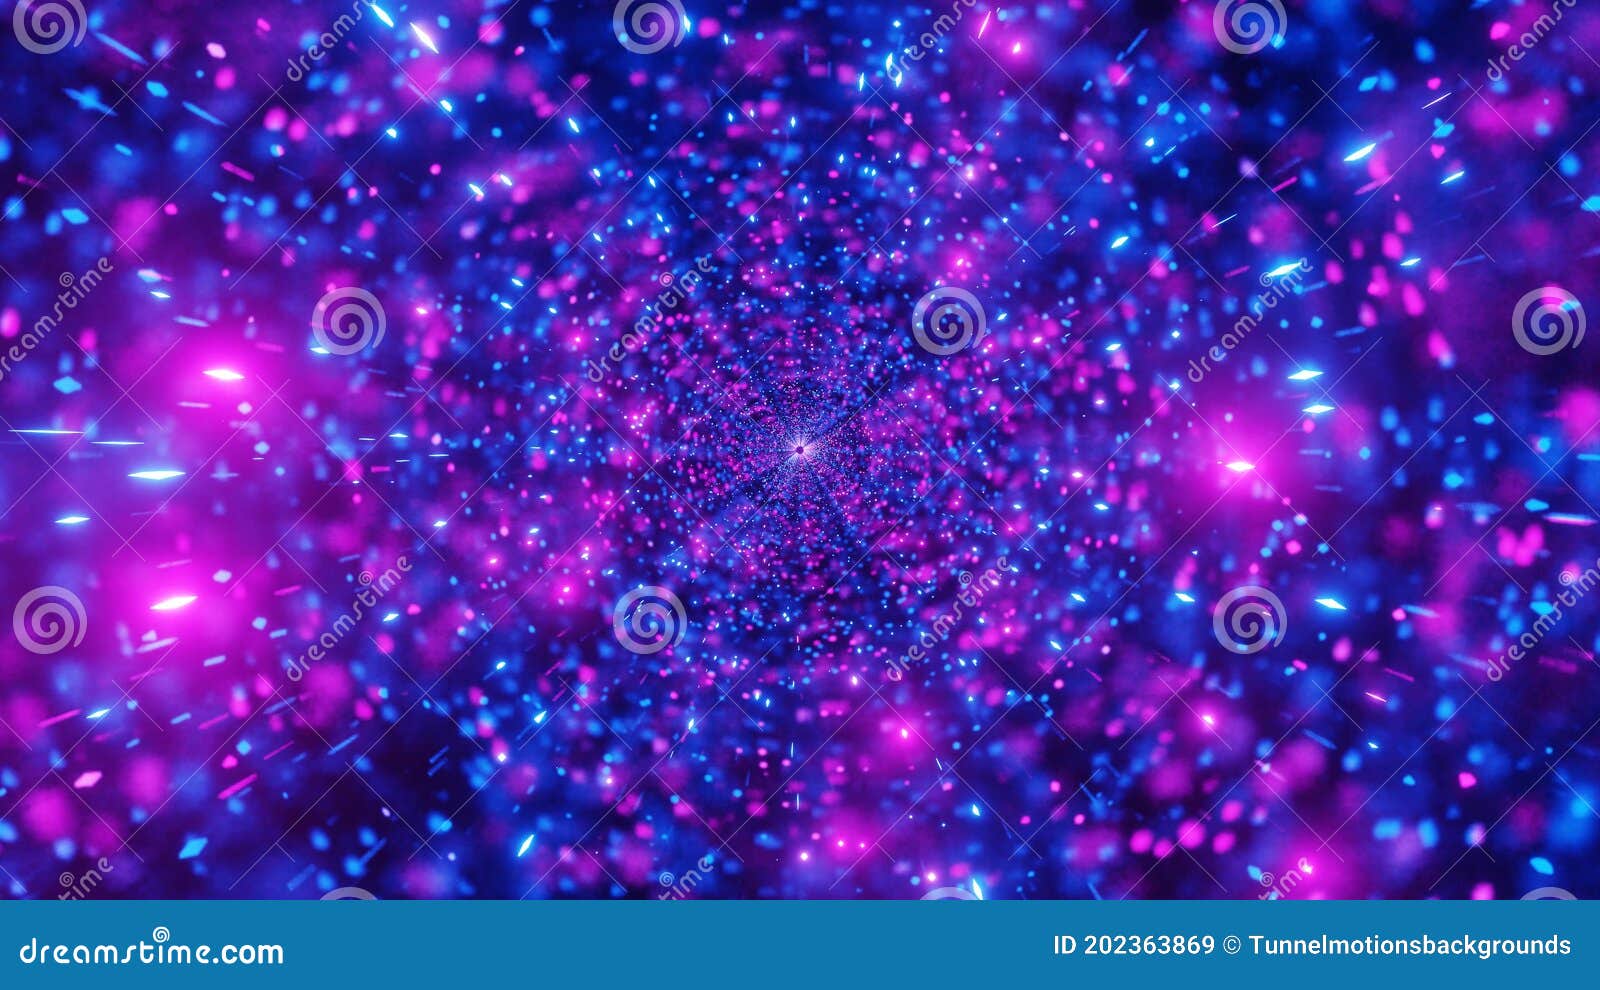 Bright Particles Space Galaxy 3d Illustration Background Wallpaper Stock  Illustration - Illustration of tunnelmotions, pink: 202363869